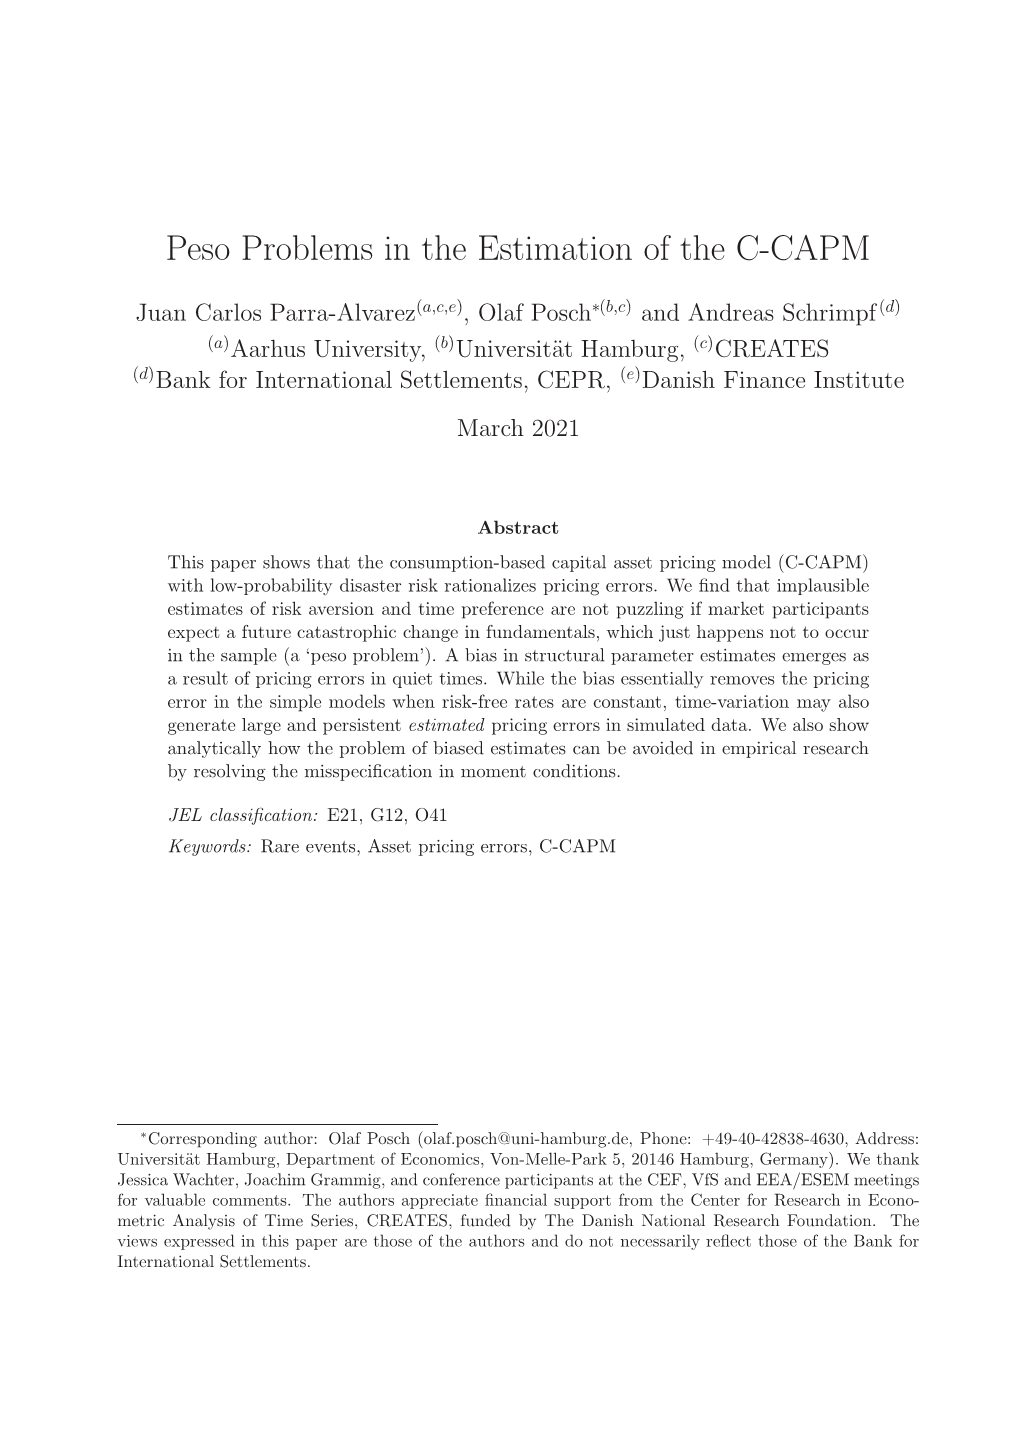 Peso Problems in the Estimation of the C-CAPM (Pdf)